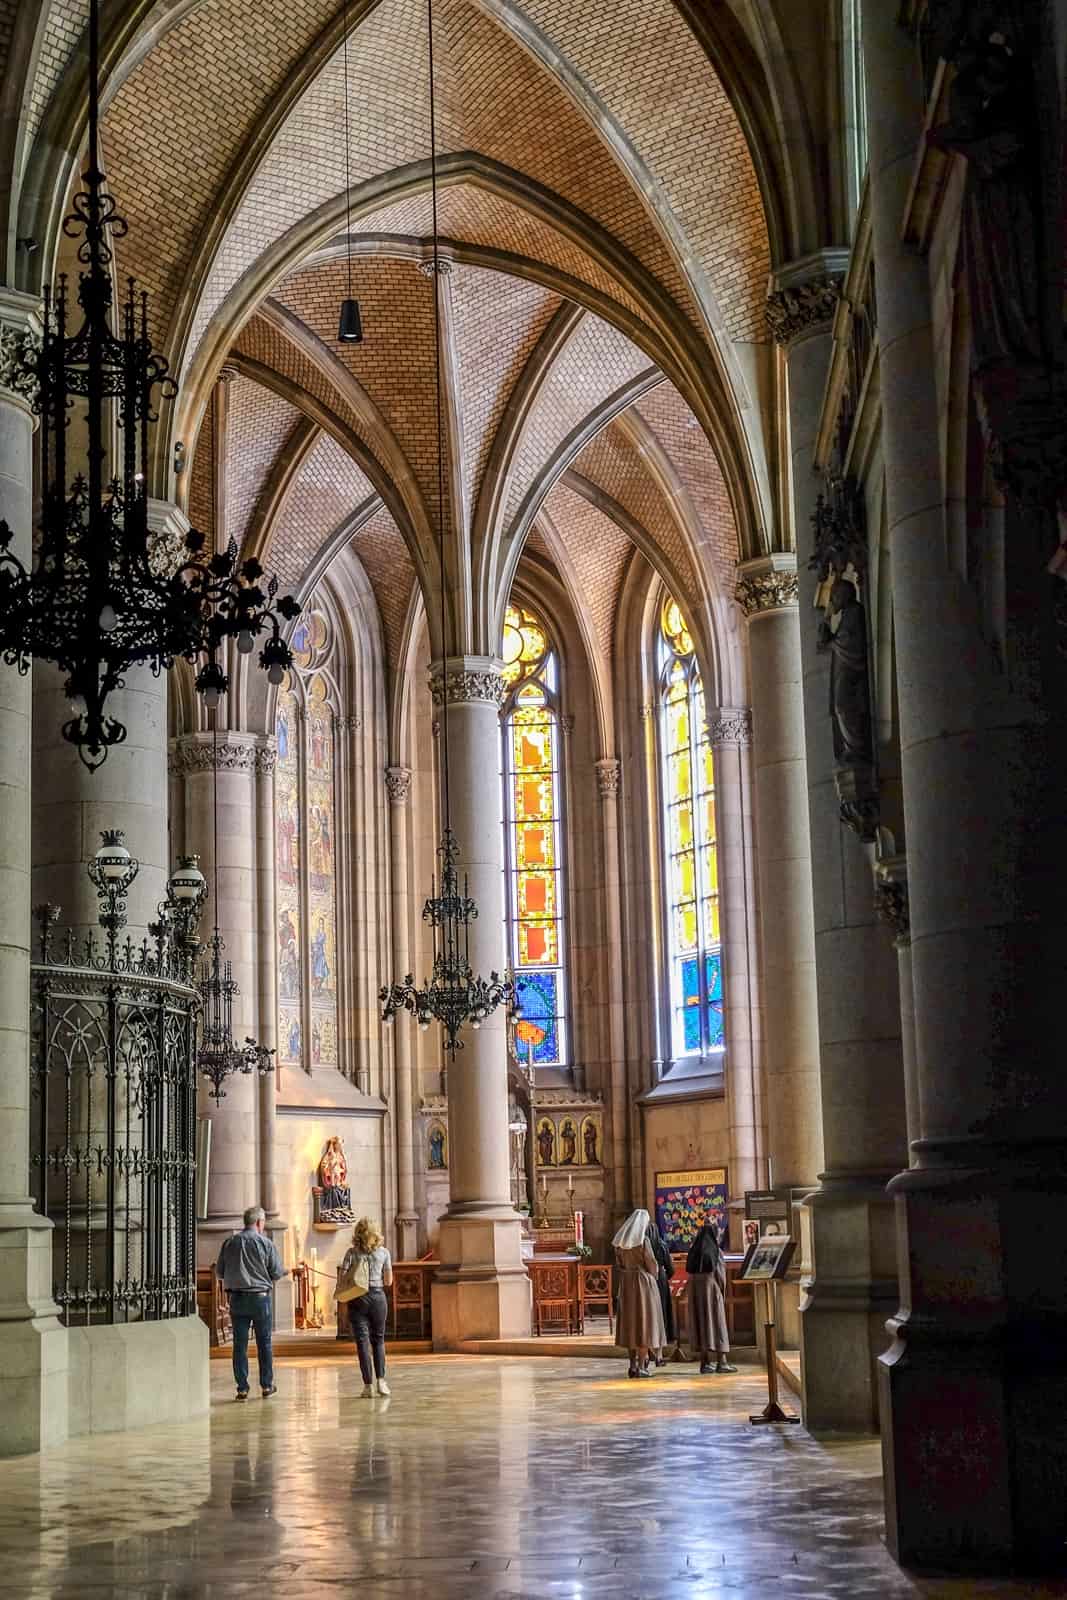 Inside the Mariendom - the biggest church in Austria - with its ornate archways and modern art stained glass windows. 